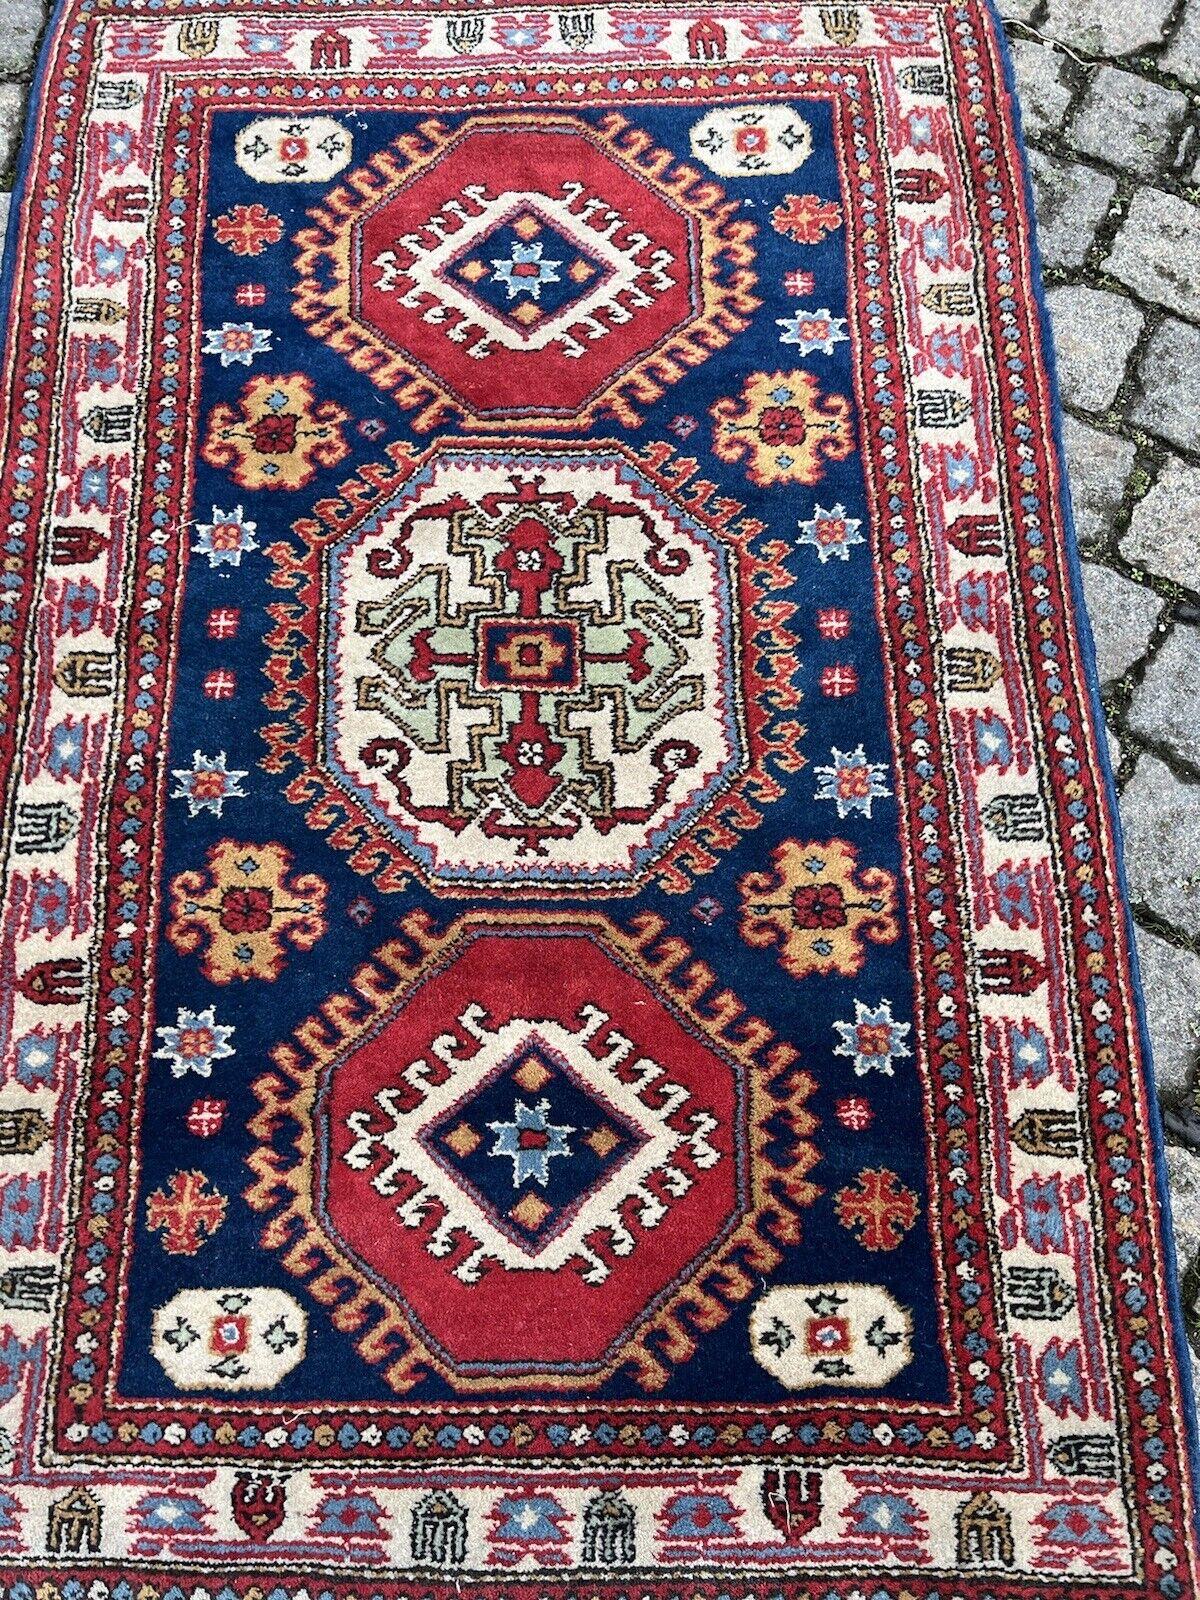 Handmade Vintage Caucasian Erevan Rug

Bring home a piece of history with this handmade vintage Caucasian Erevan rug. This rug was made in the 1970s from wool, a natural and durable material that can withstand years of use. The rug features three